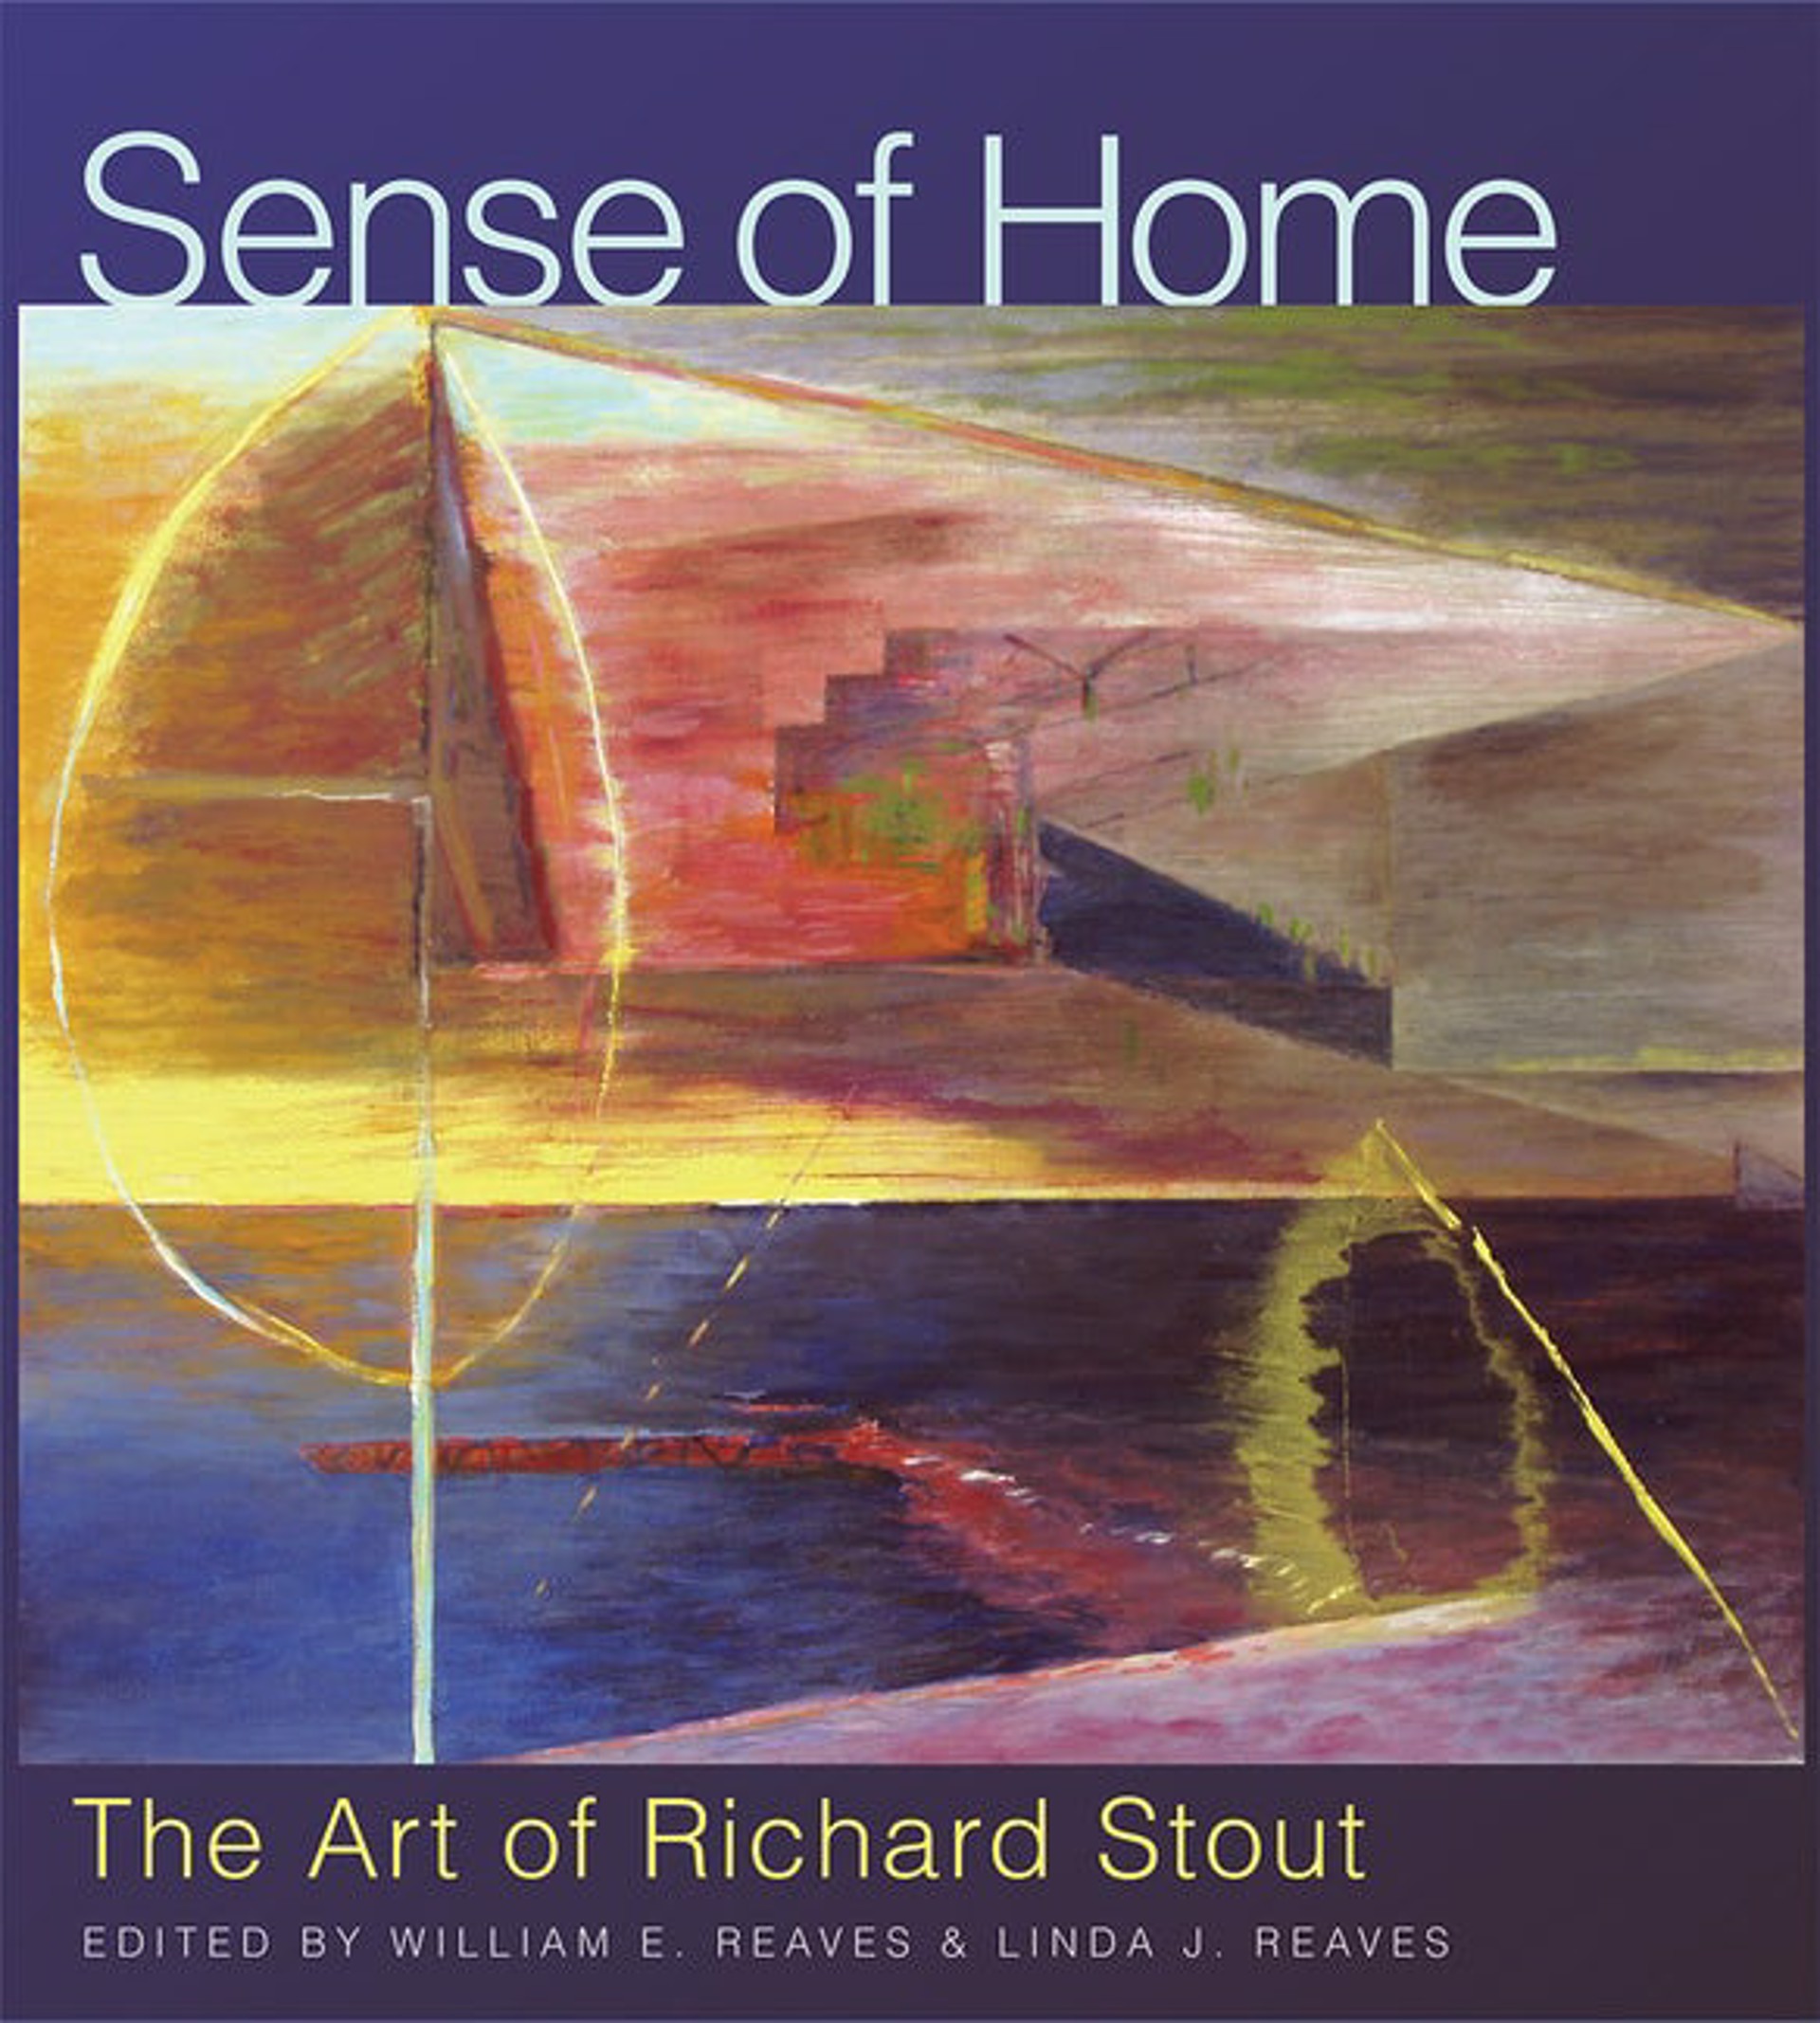 Sense of Home: The Art of Richard Stout by Publications